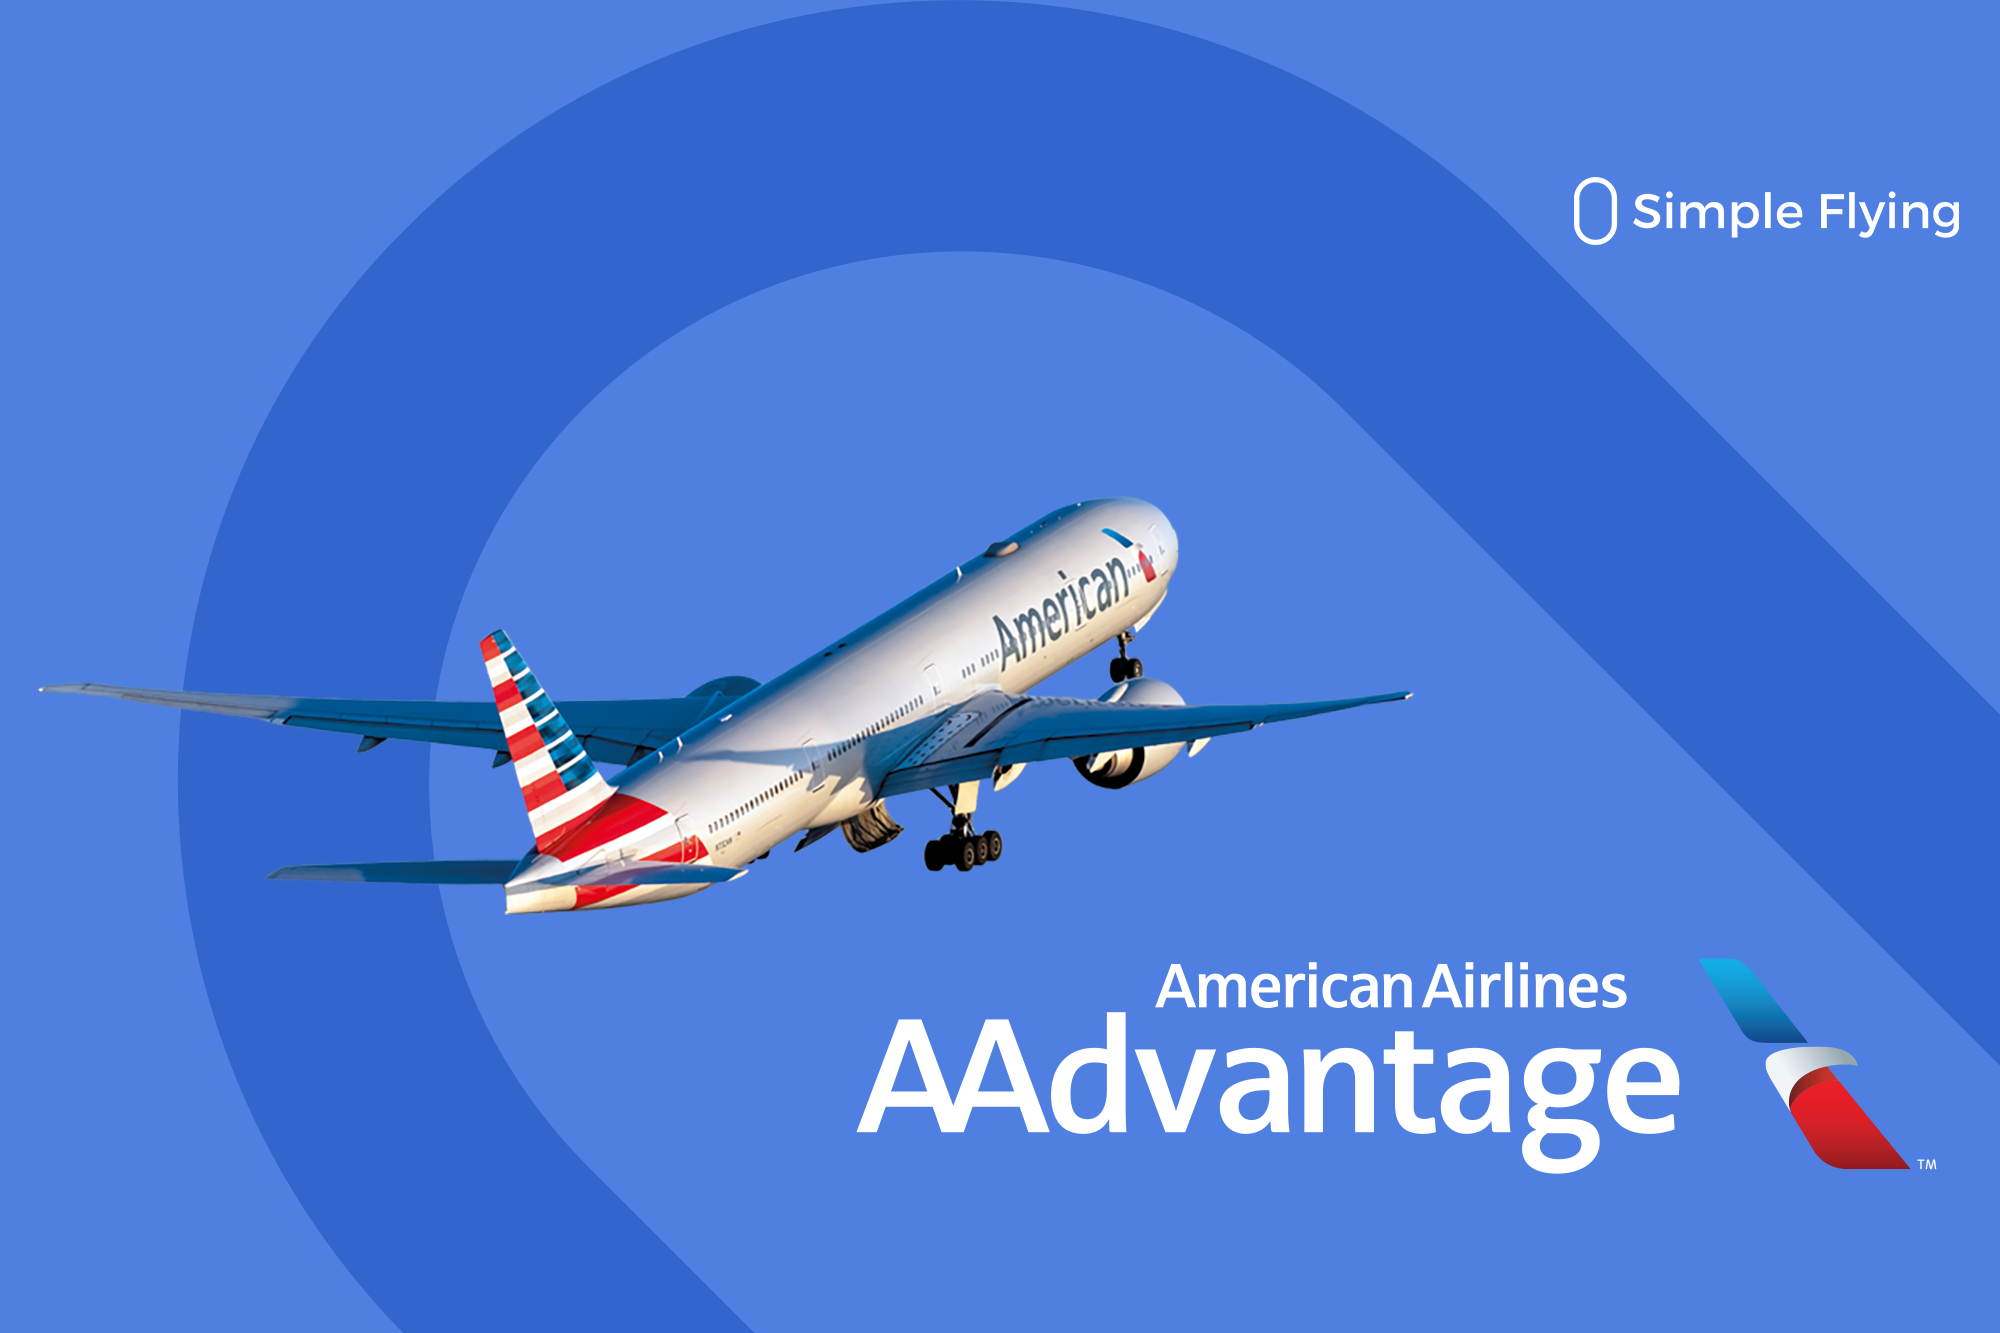 American Airlines' AAdvantage Frequent Flyer Program: The Simple